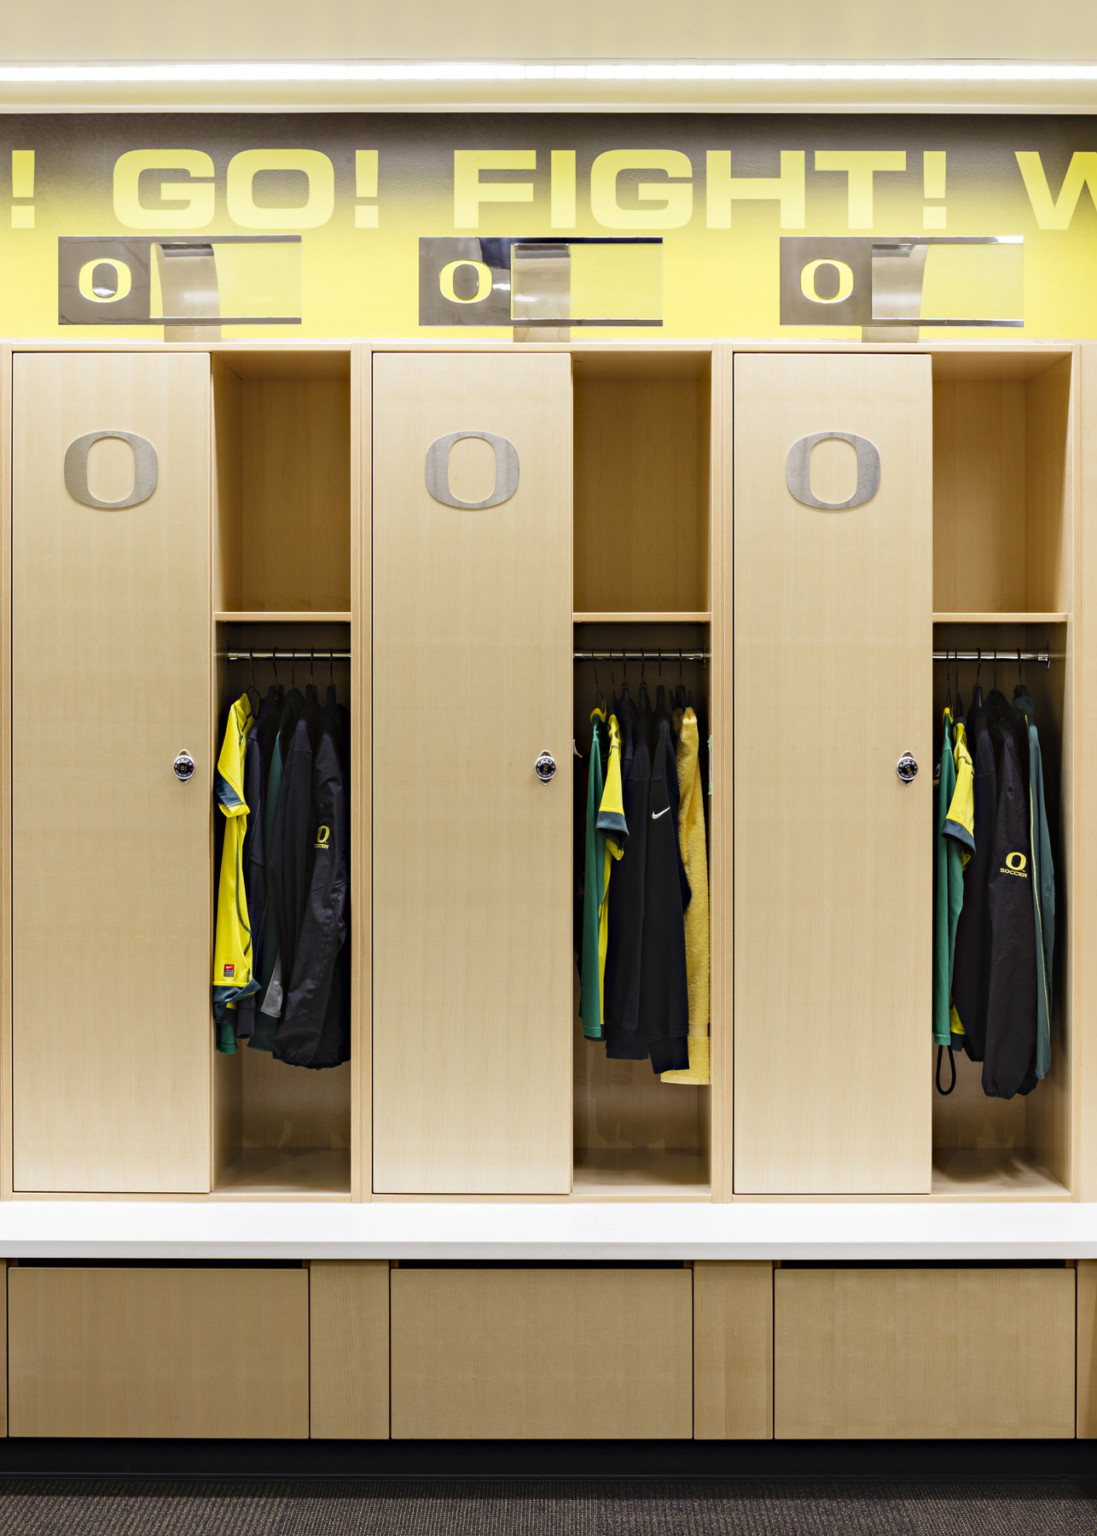 Closeup of maple wood lockers with Oregon logo on doors and exposed hanger and shelf. White bench. Above, fight song and nameplates